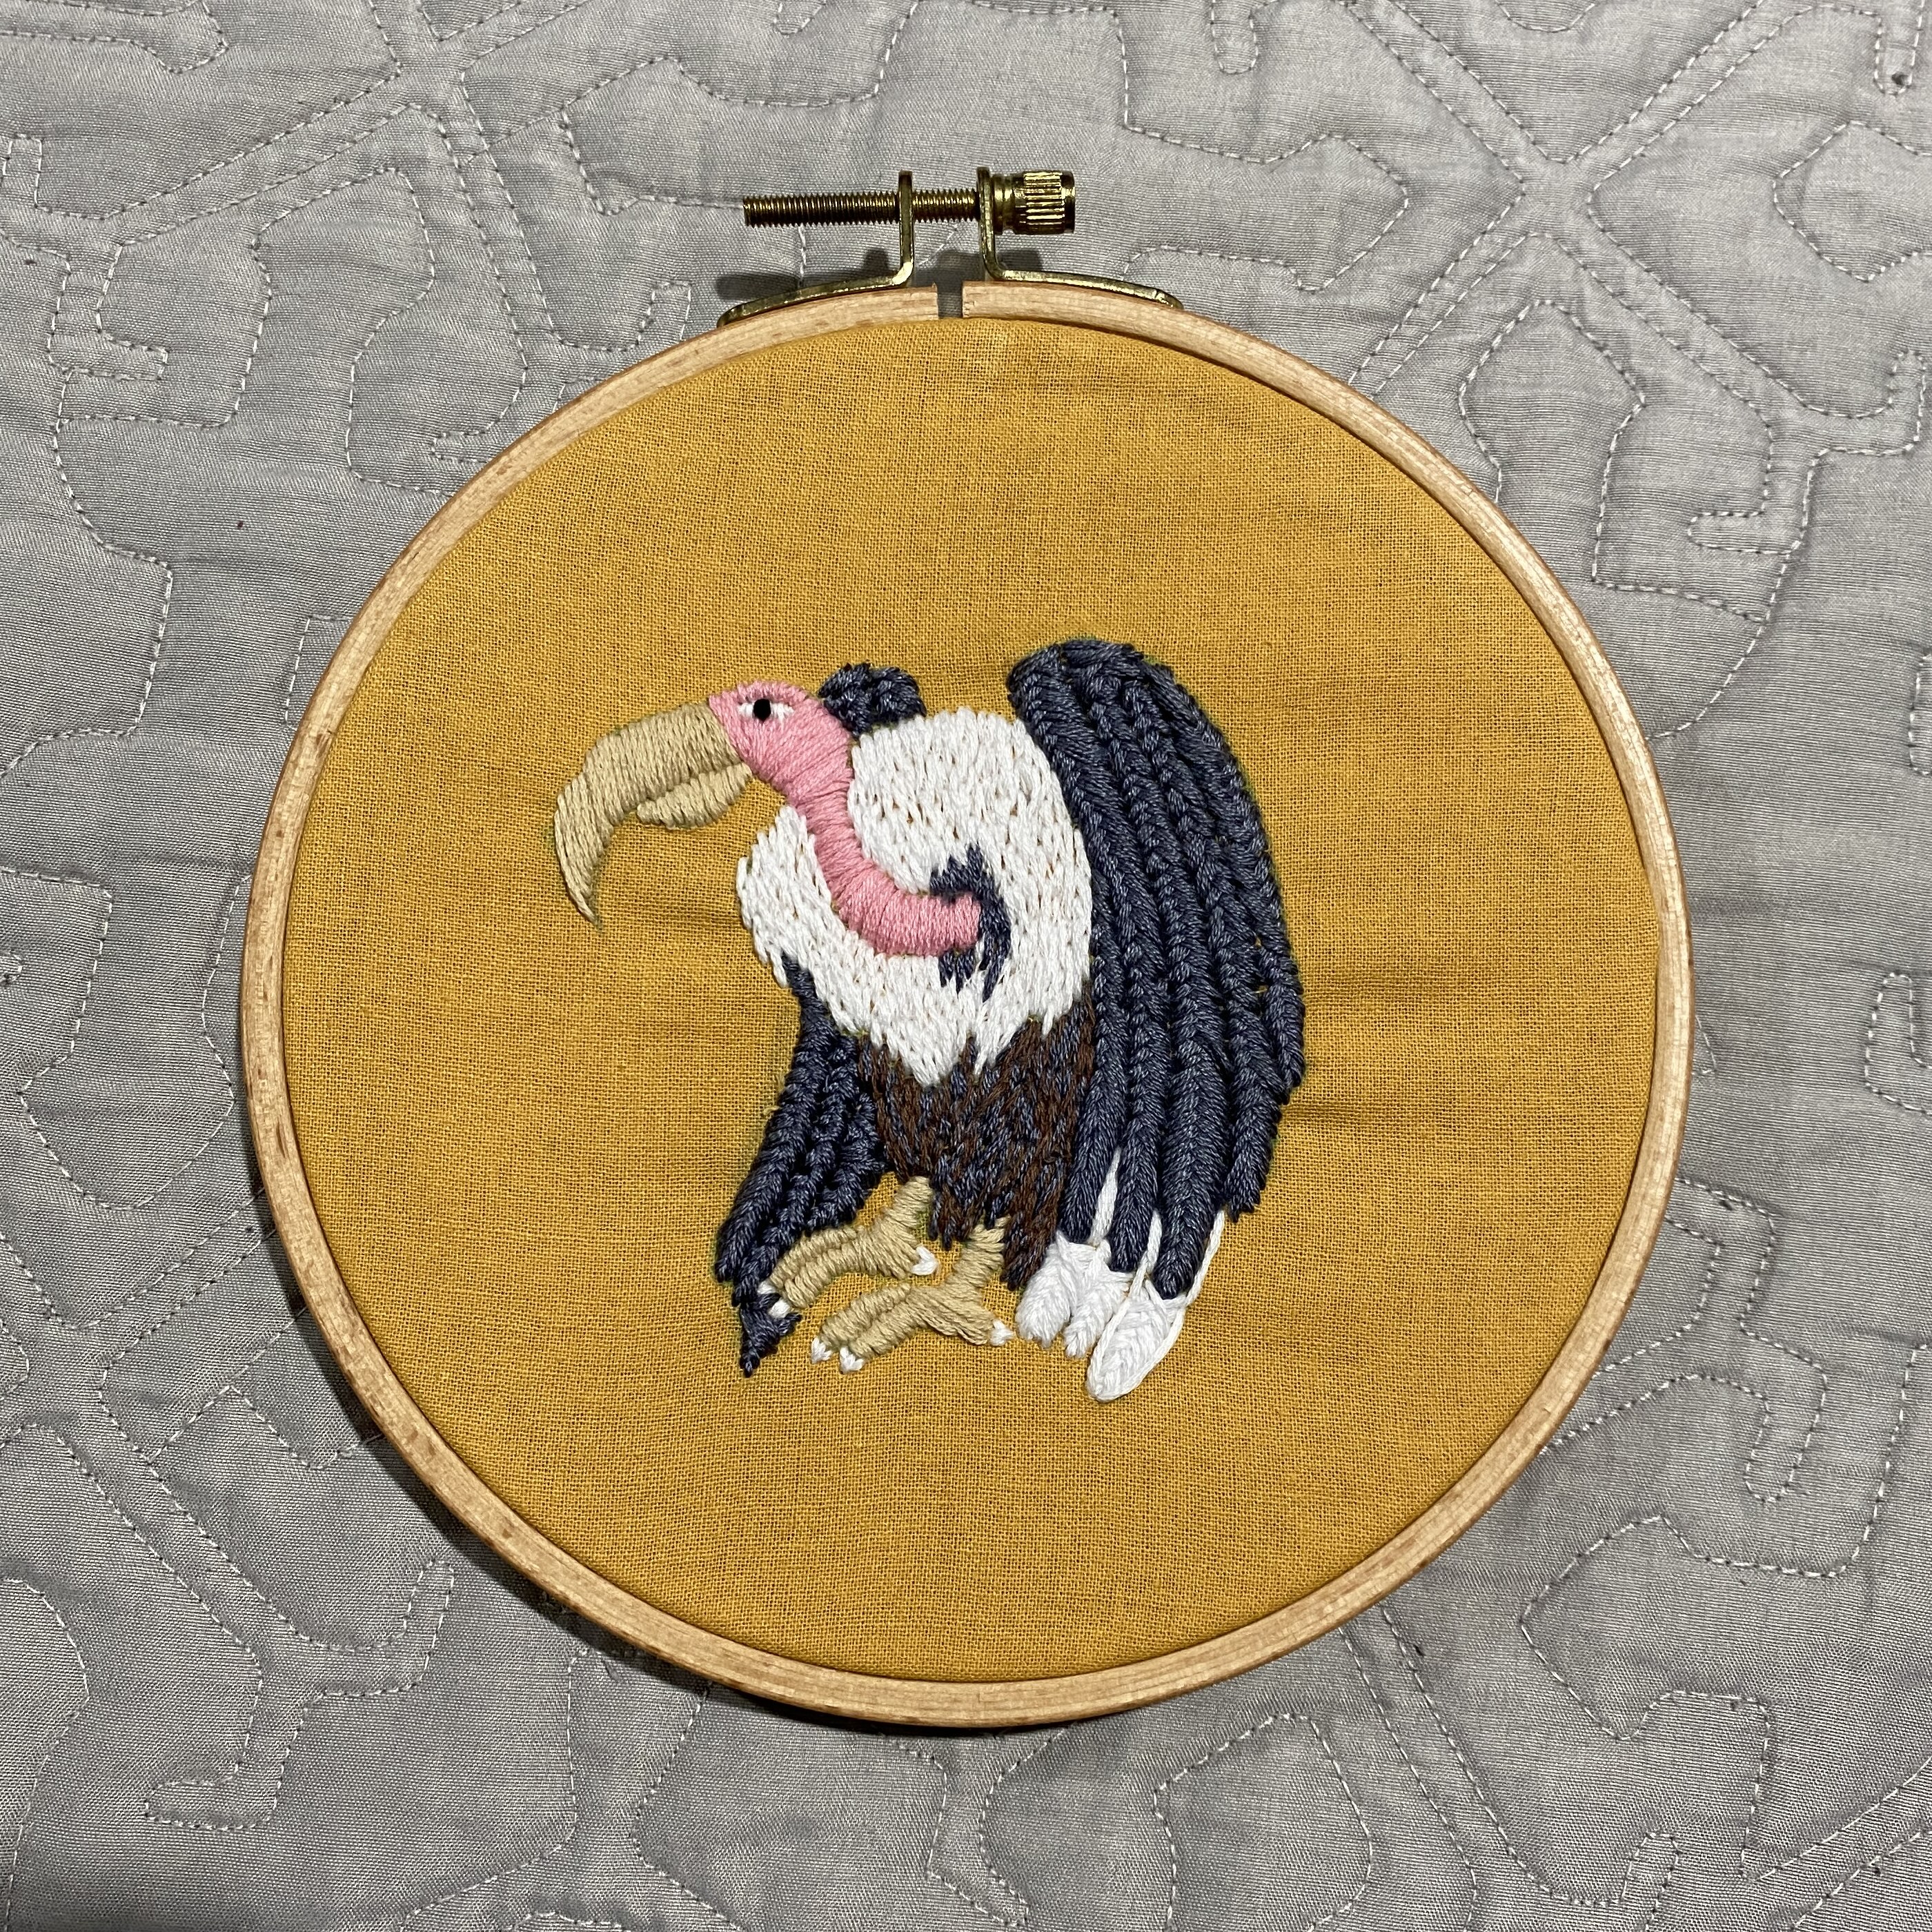 Embroidery of a vulture.